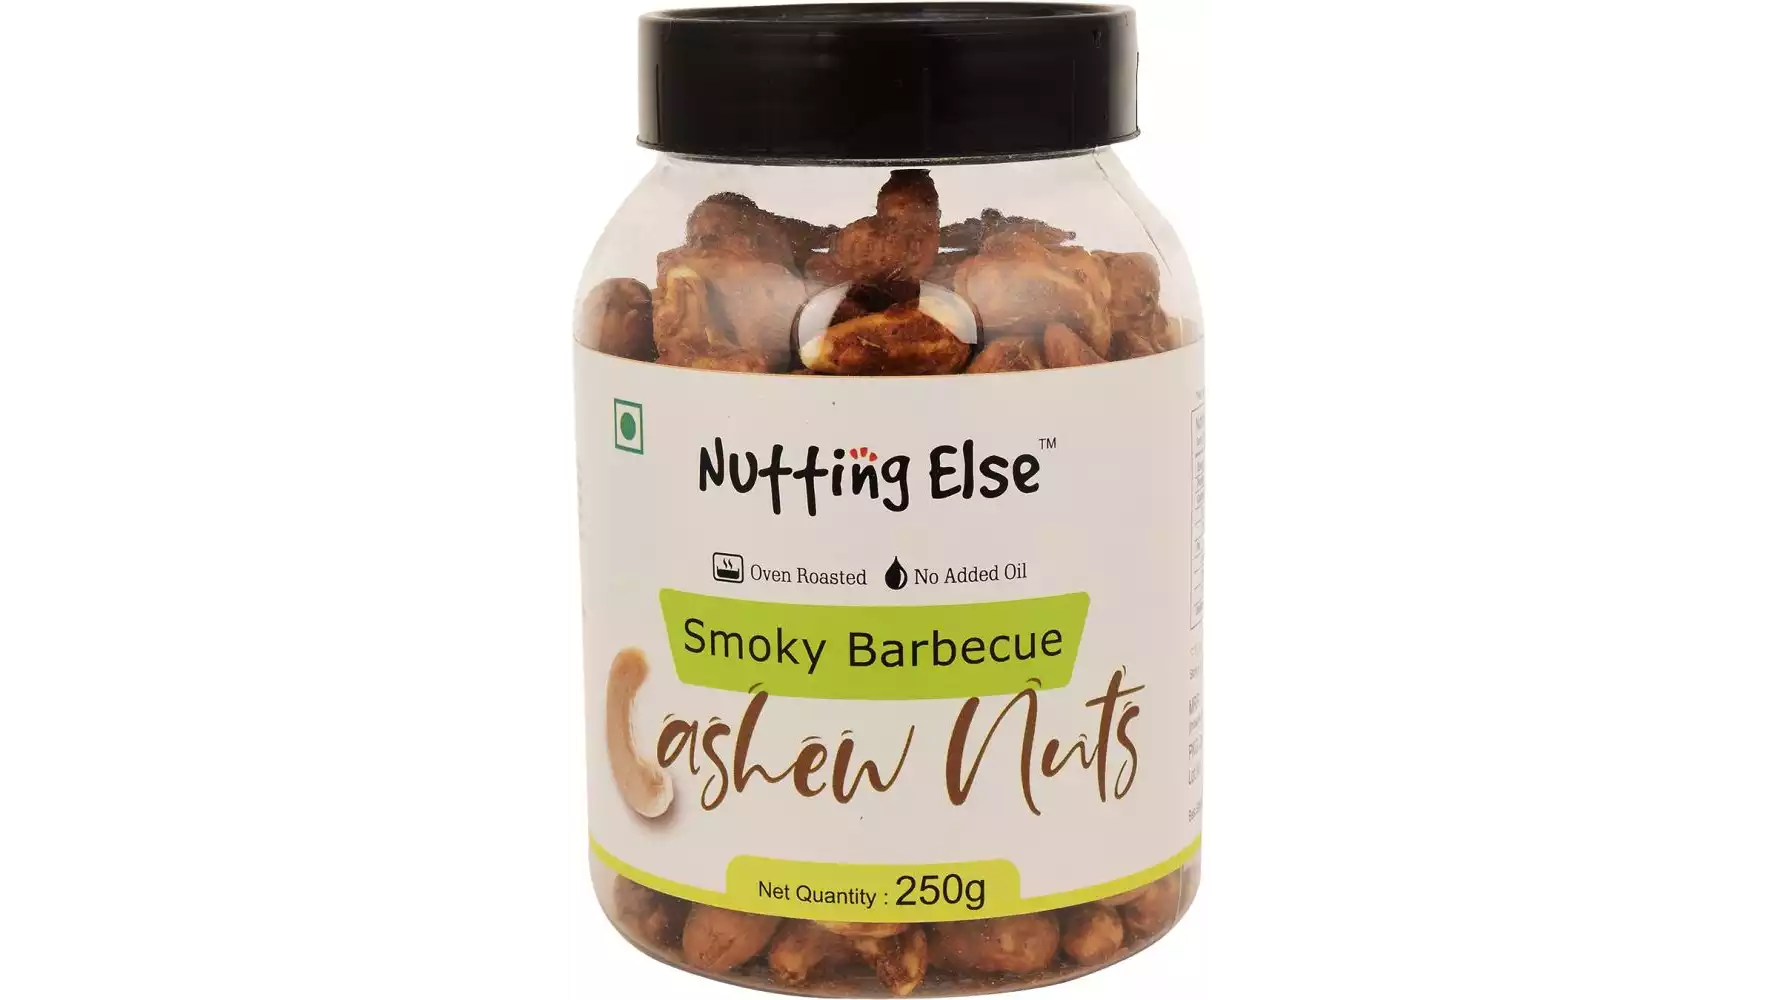 Nutting Else Smoky Barbecue Cashew Nuts (250g)